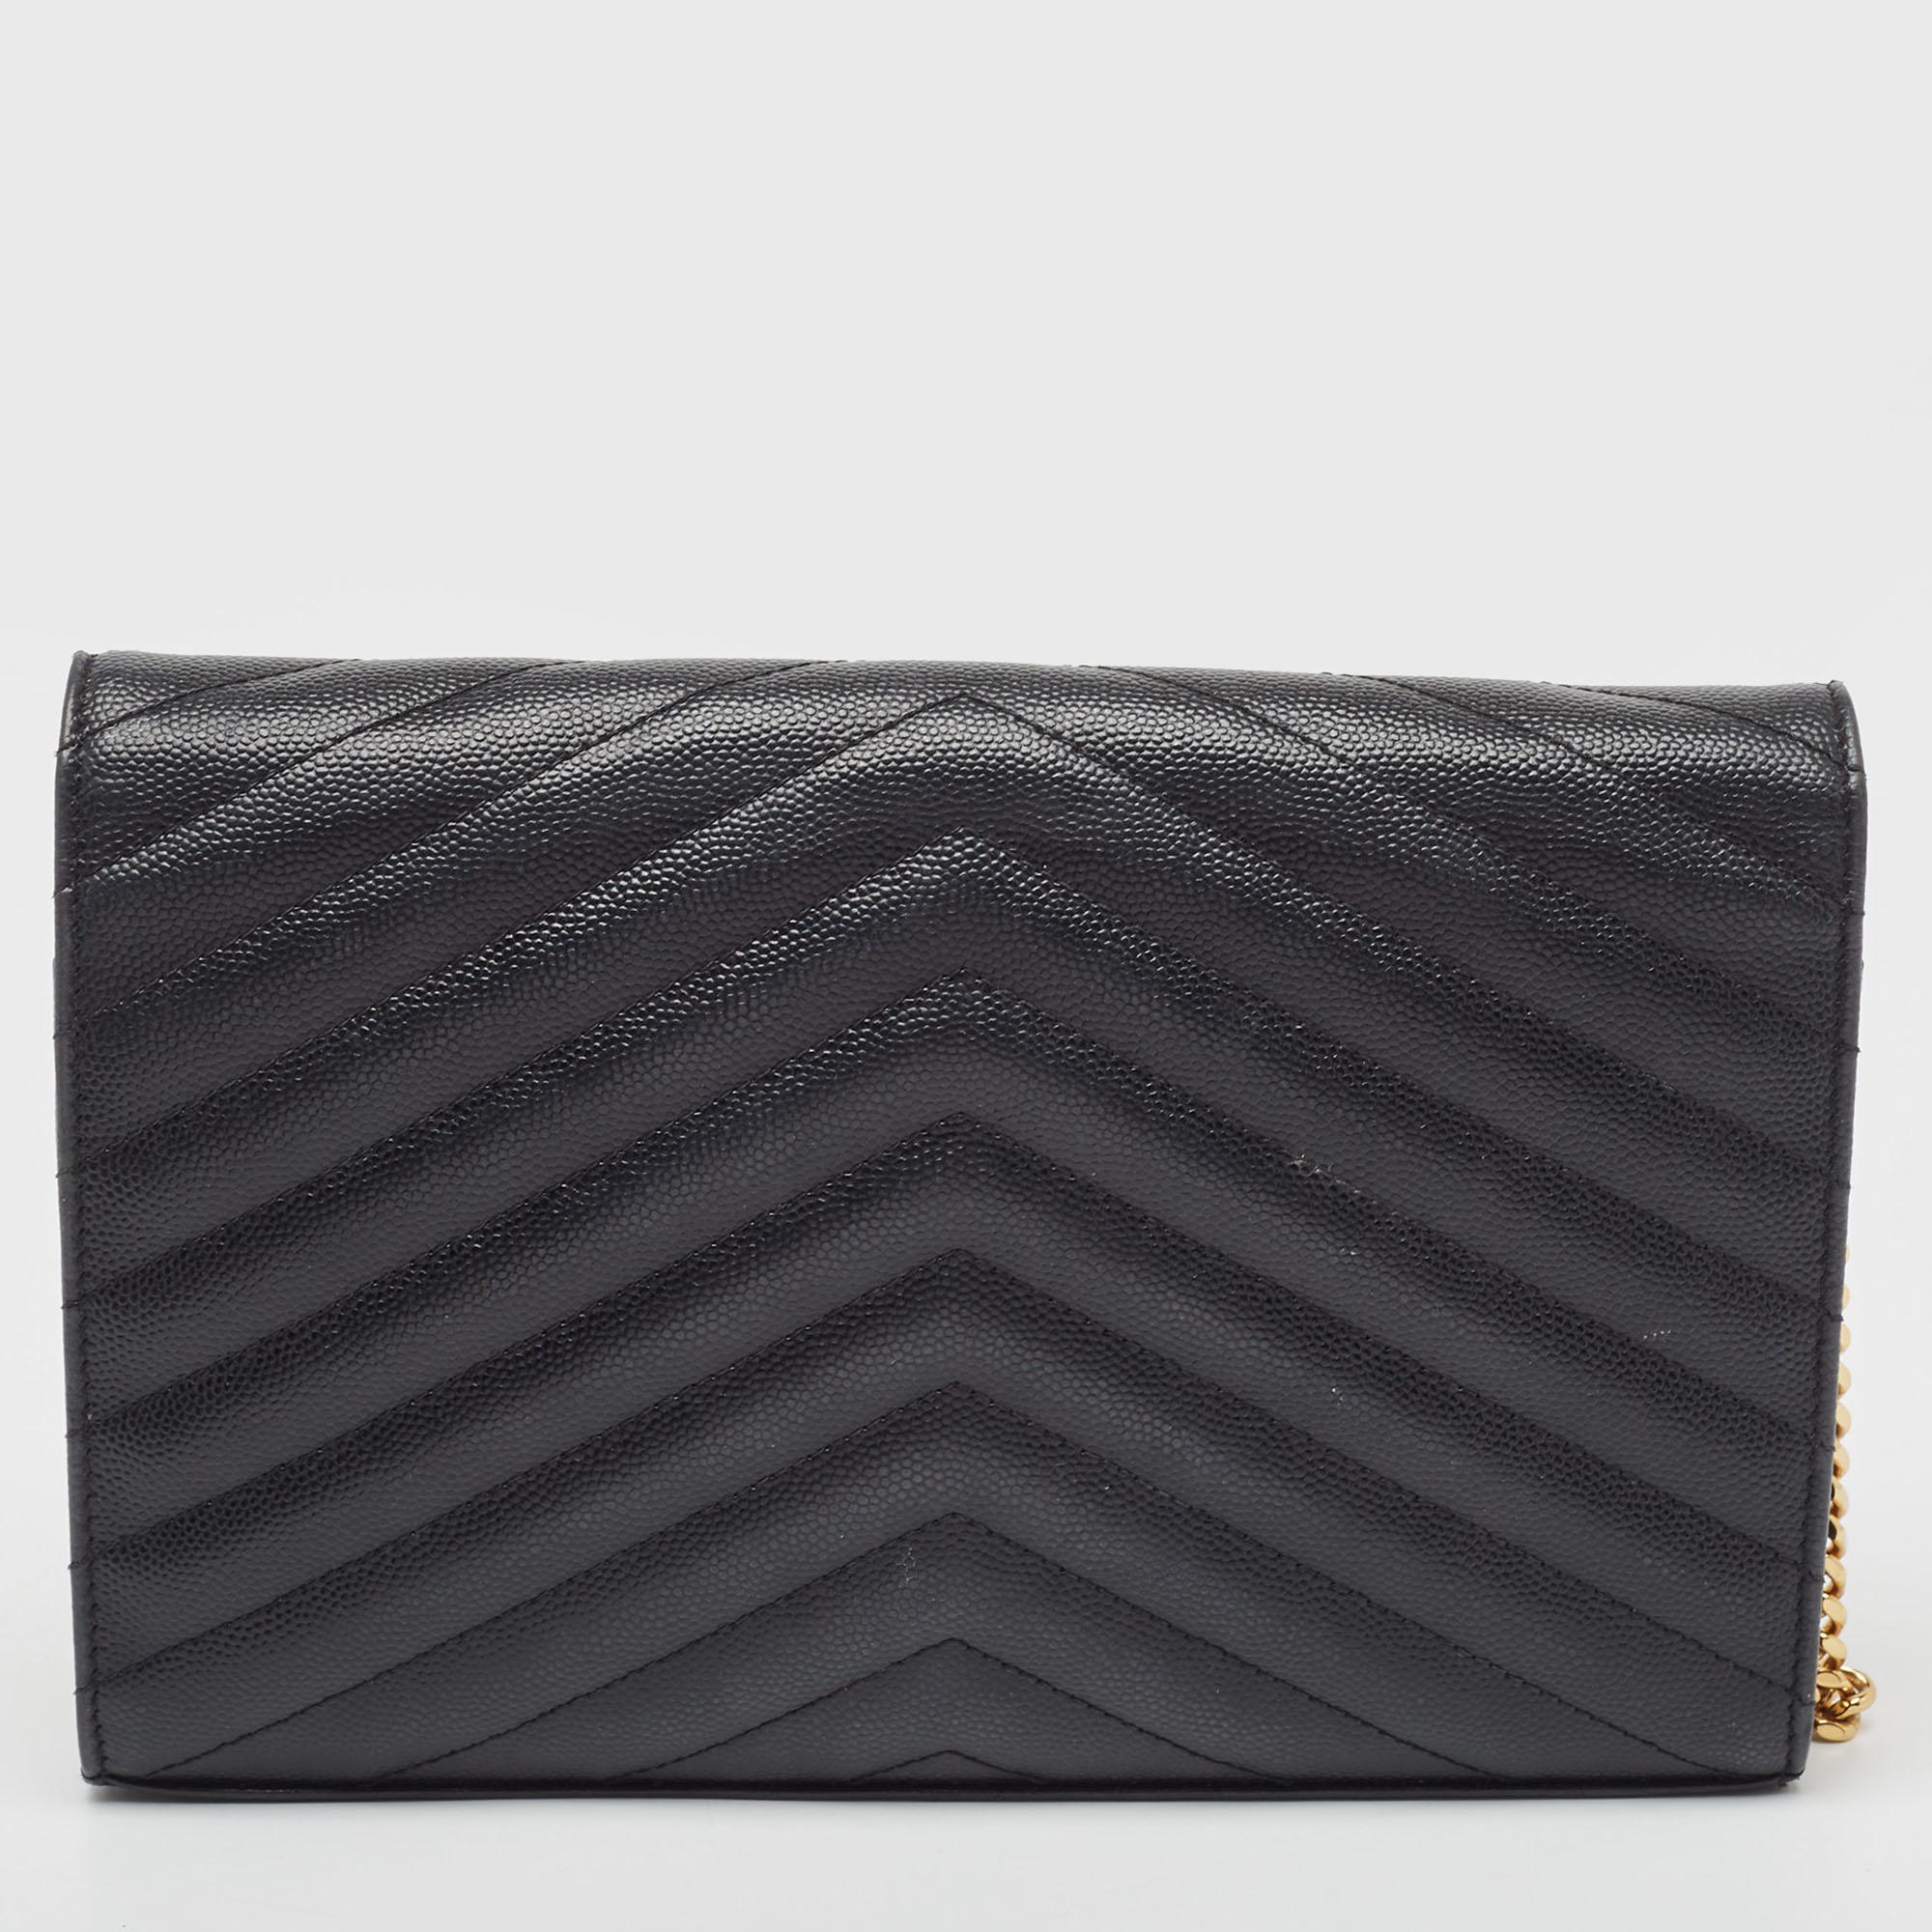 This Saint Laurent wallet on chain is conveniently designed for easy wear. It comes with a well-spaced interior for you to arrange your cards and cash neatly. This stylish piece is complete with a chain link.

Includes: Original Dustbag, Detachable